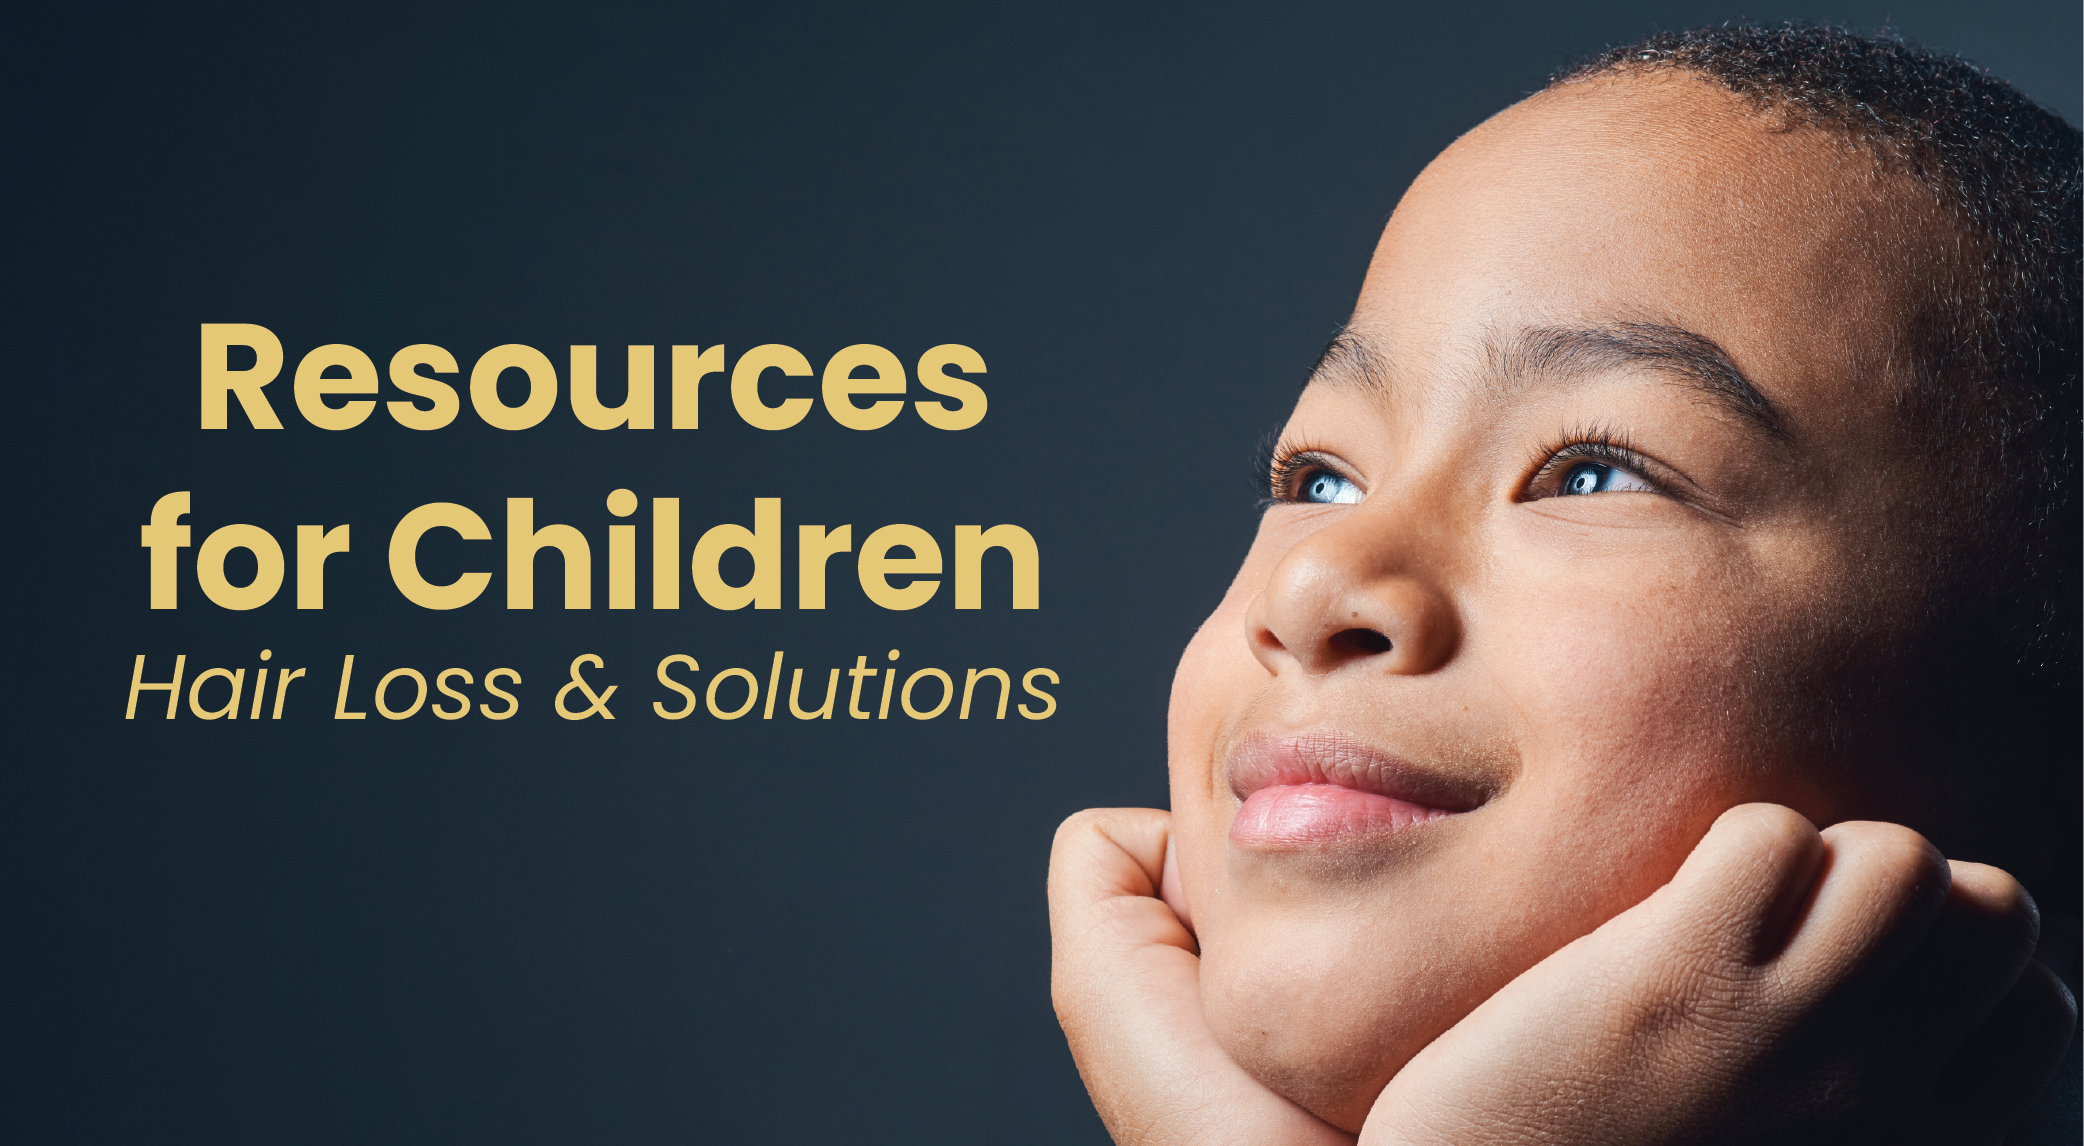 Resources For Children Hair Loss & Solutions